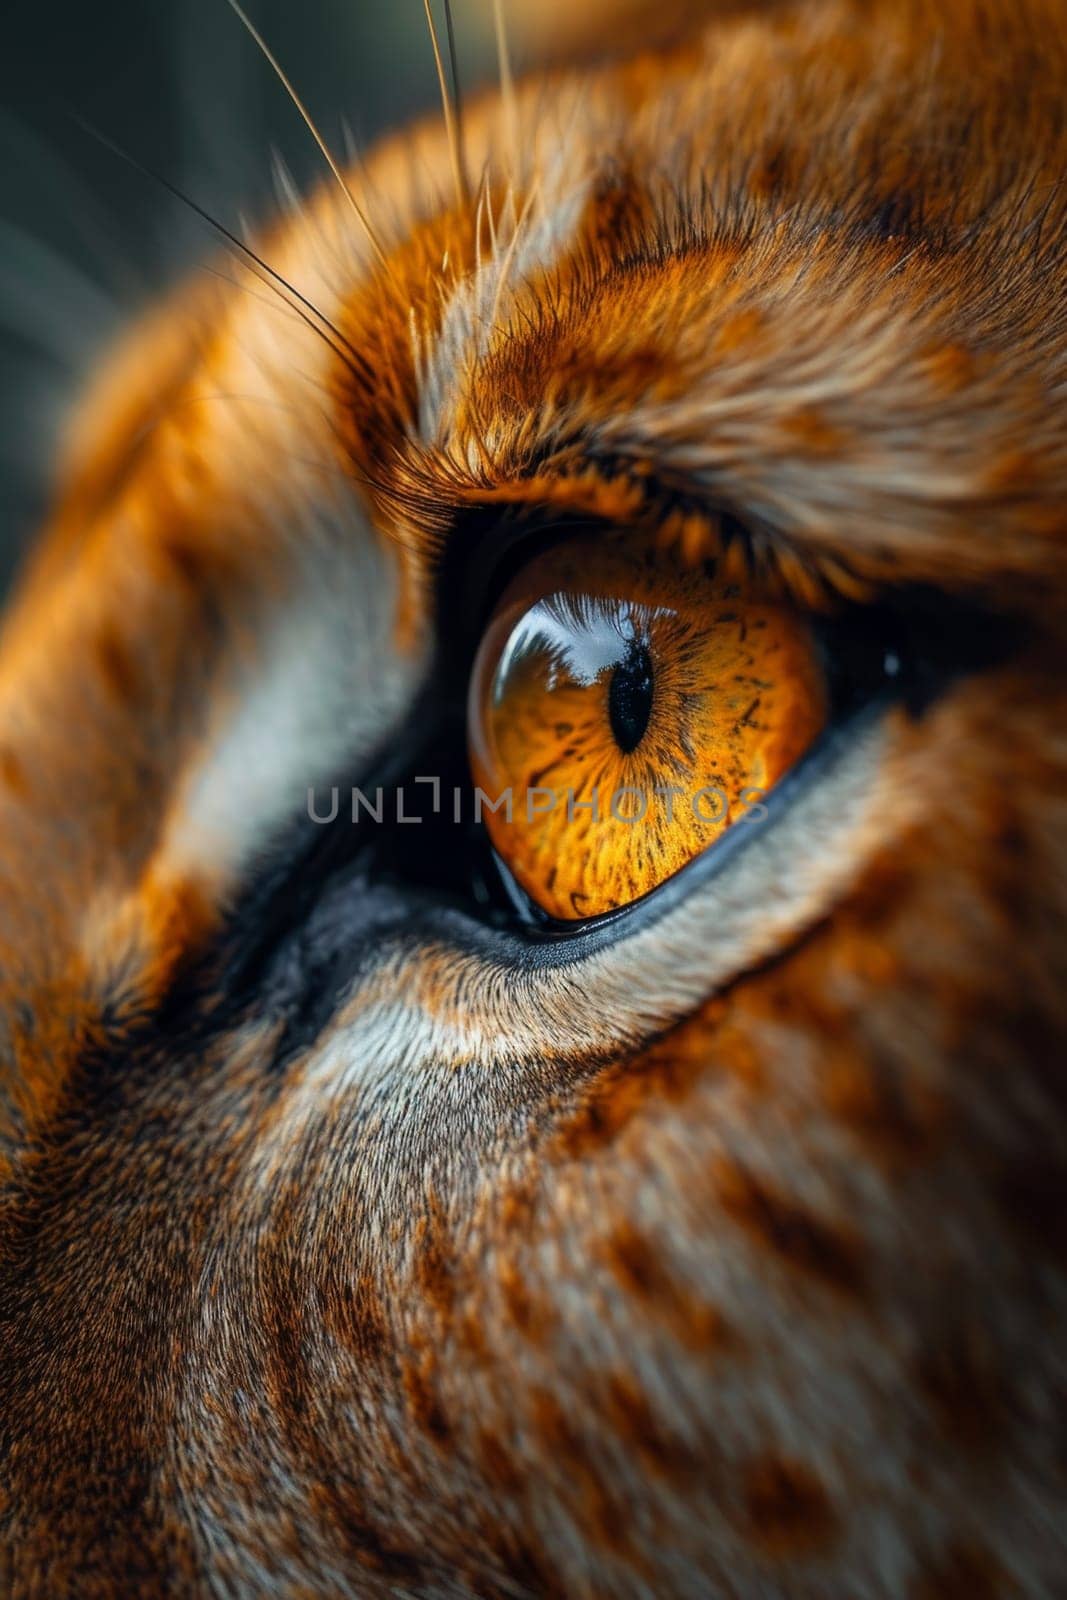 Close-up of a young lioness's face and eyes by Lobachad